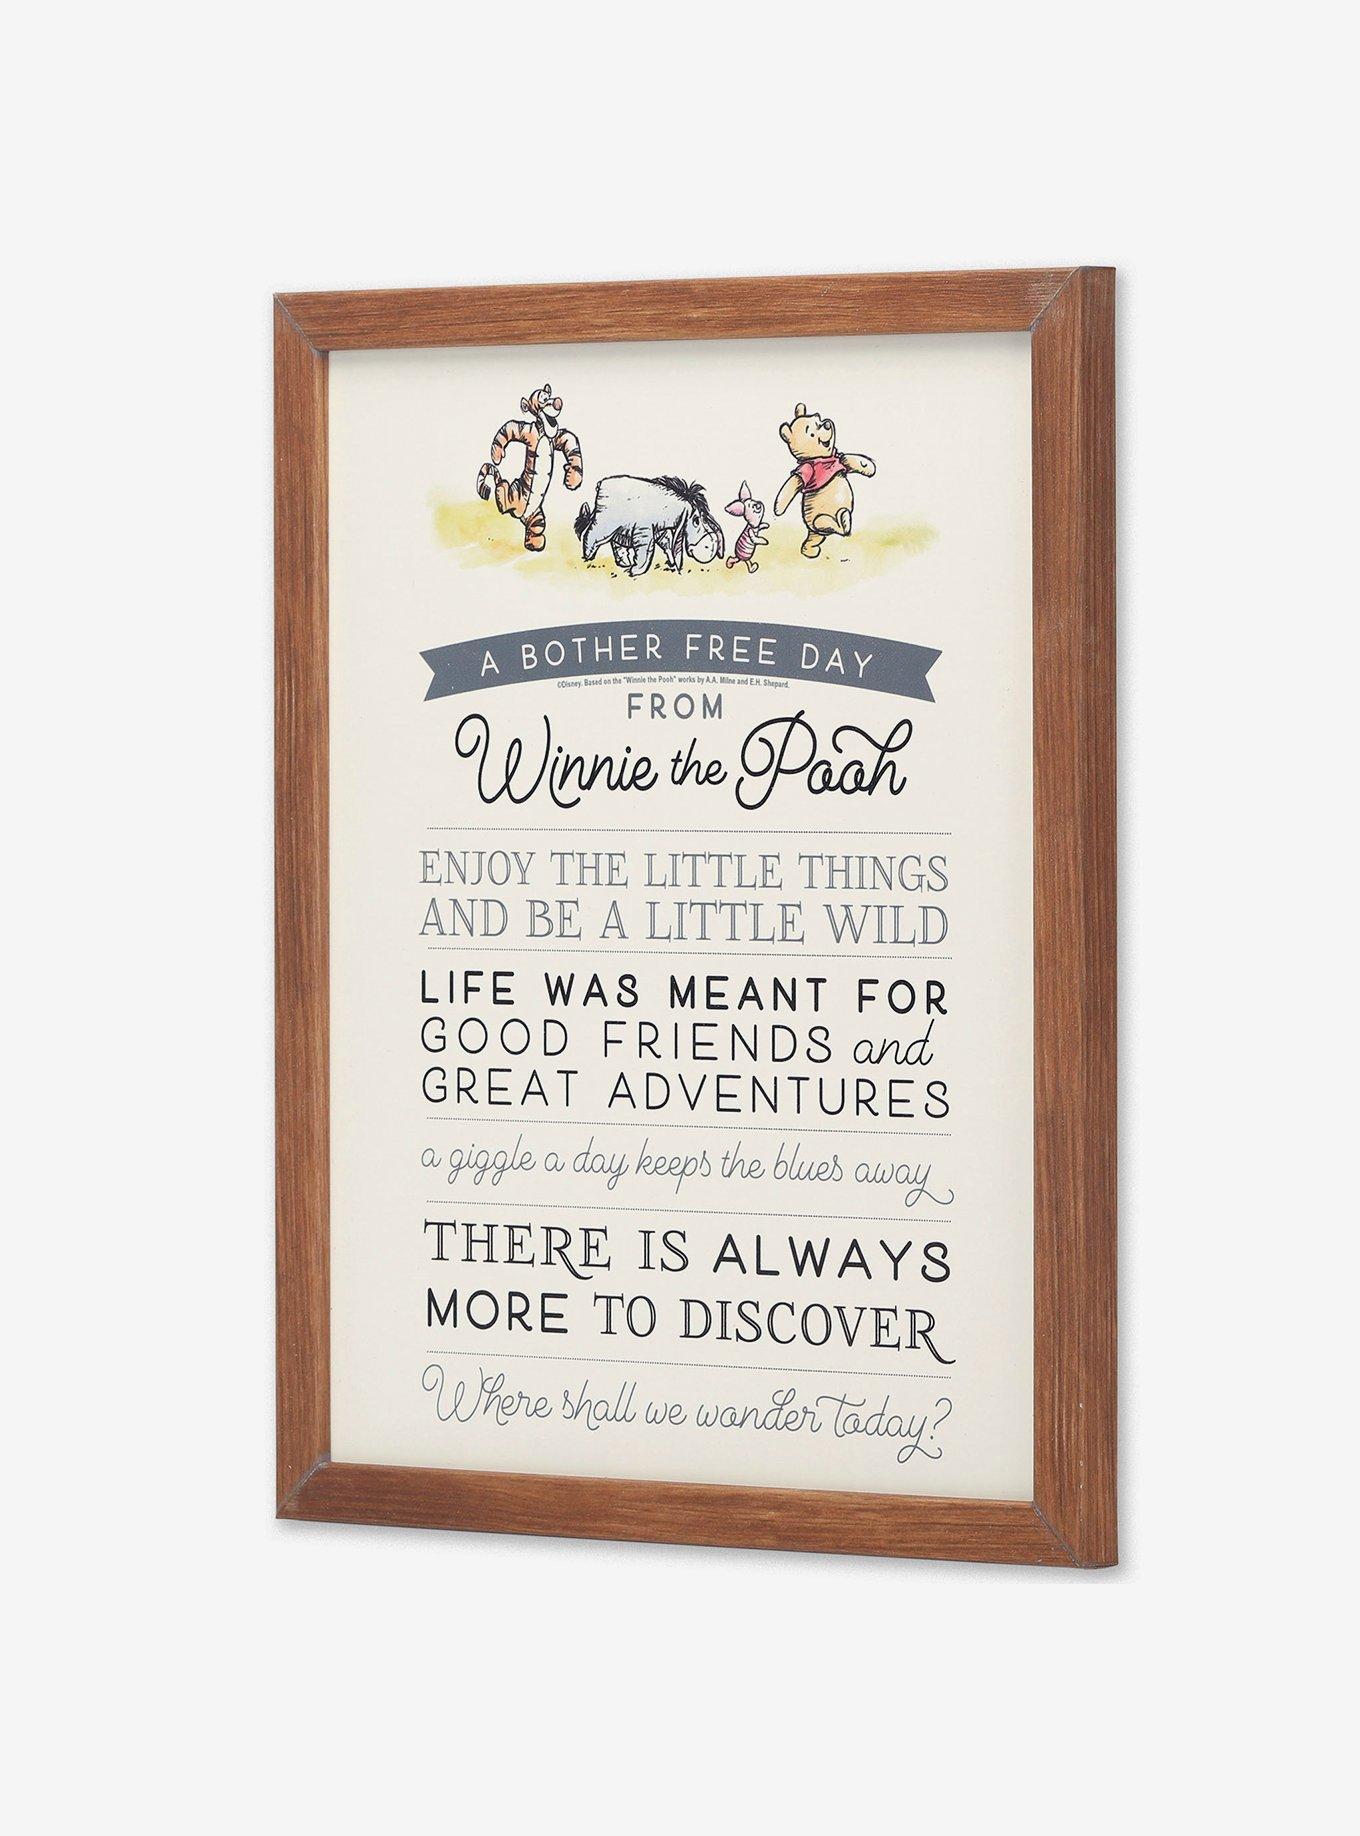 Disney Winnie The Pooh Bother Free Day Framed Wood Wall Decor